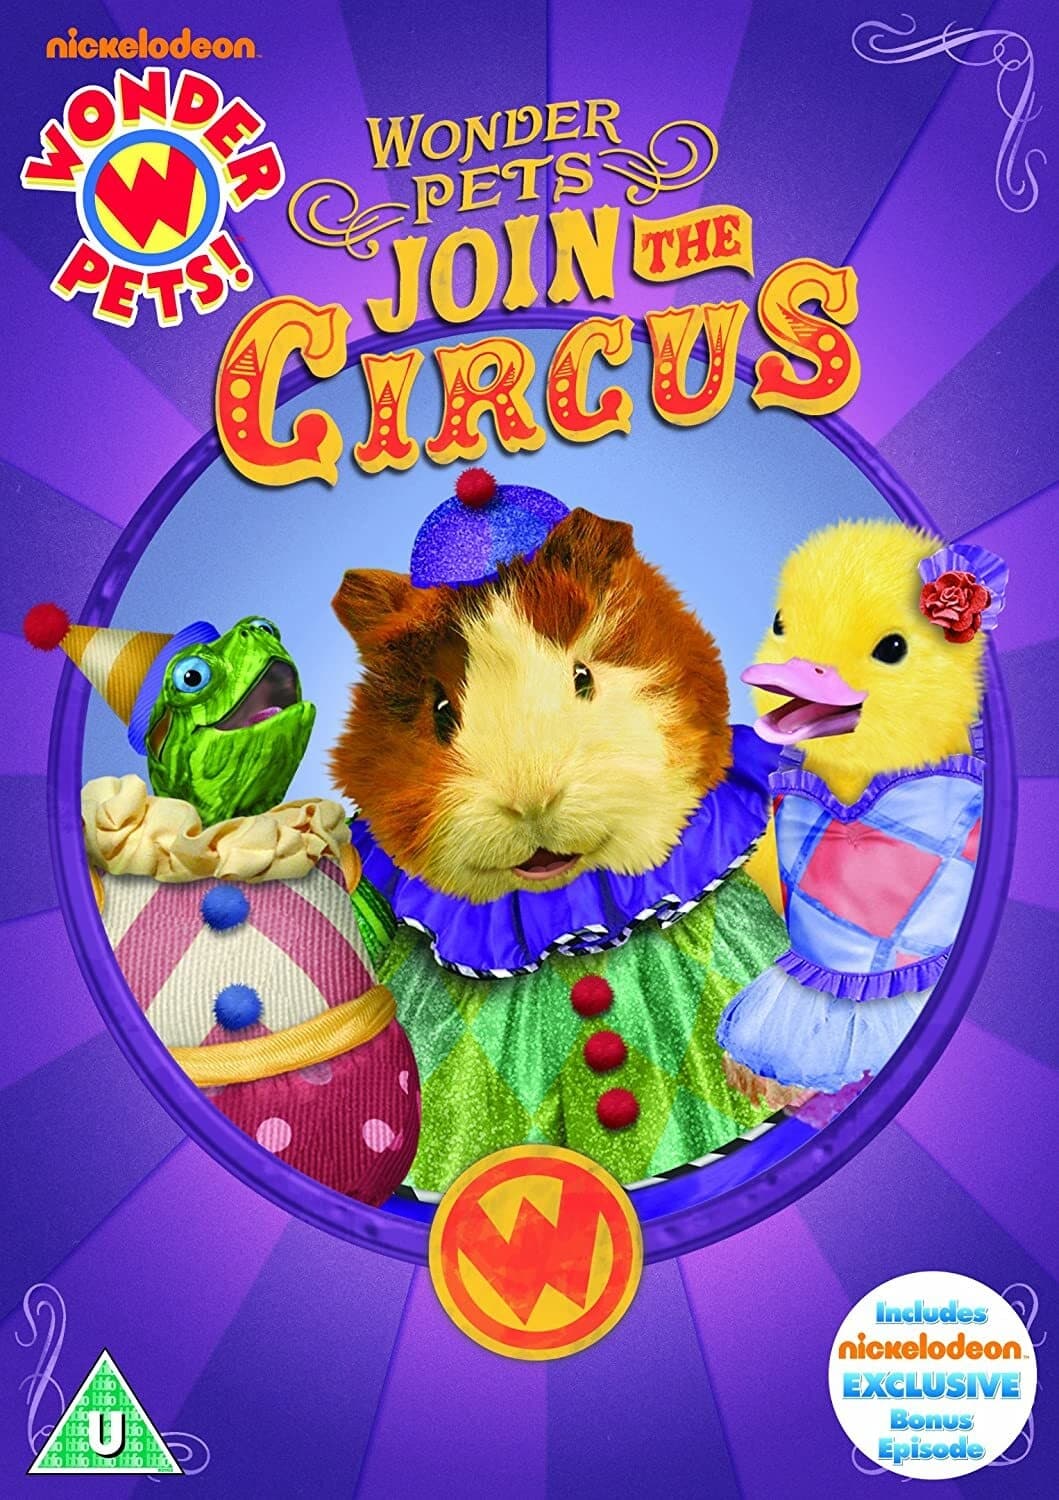 The Wonder Pets - Join the Circus